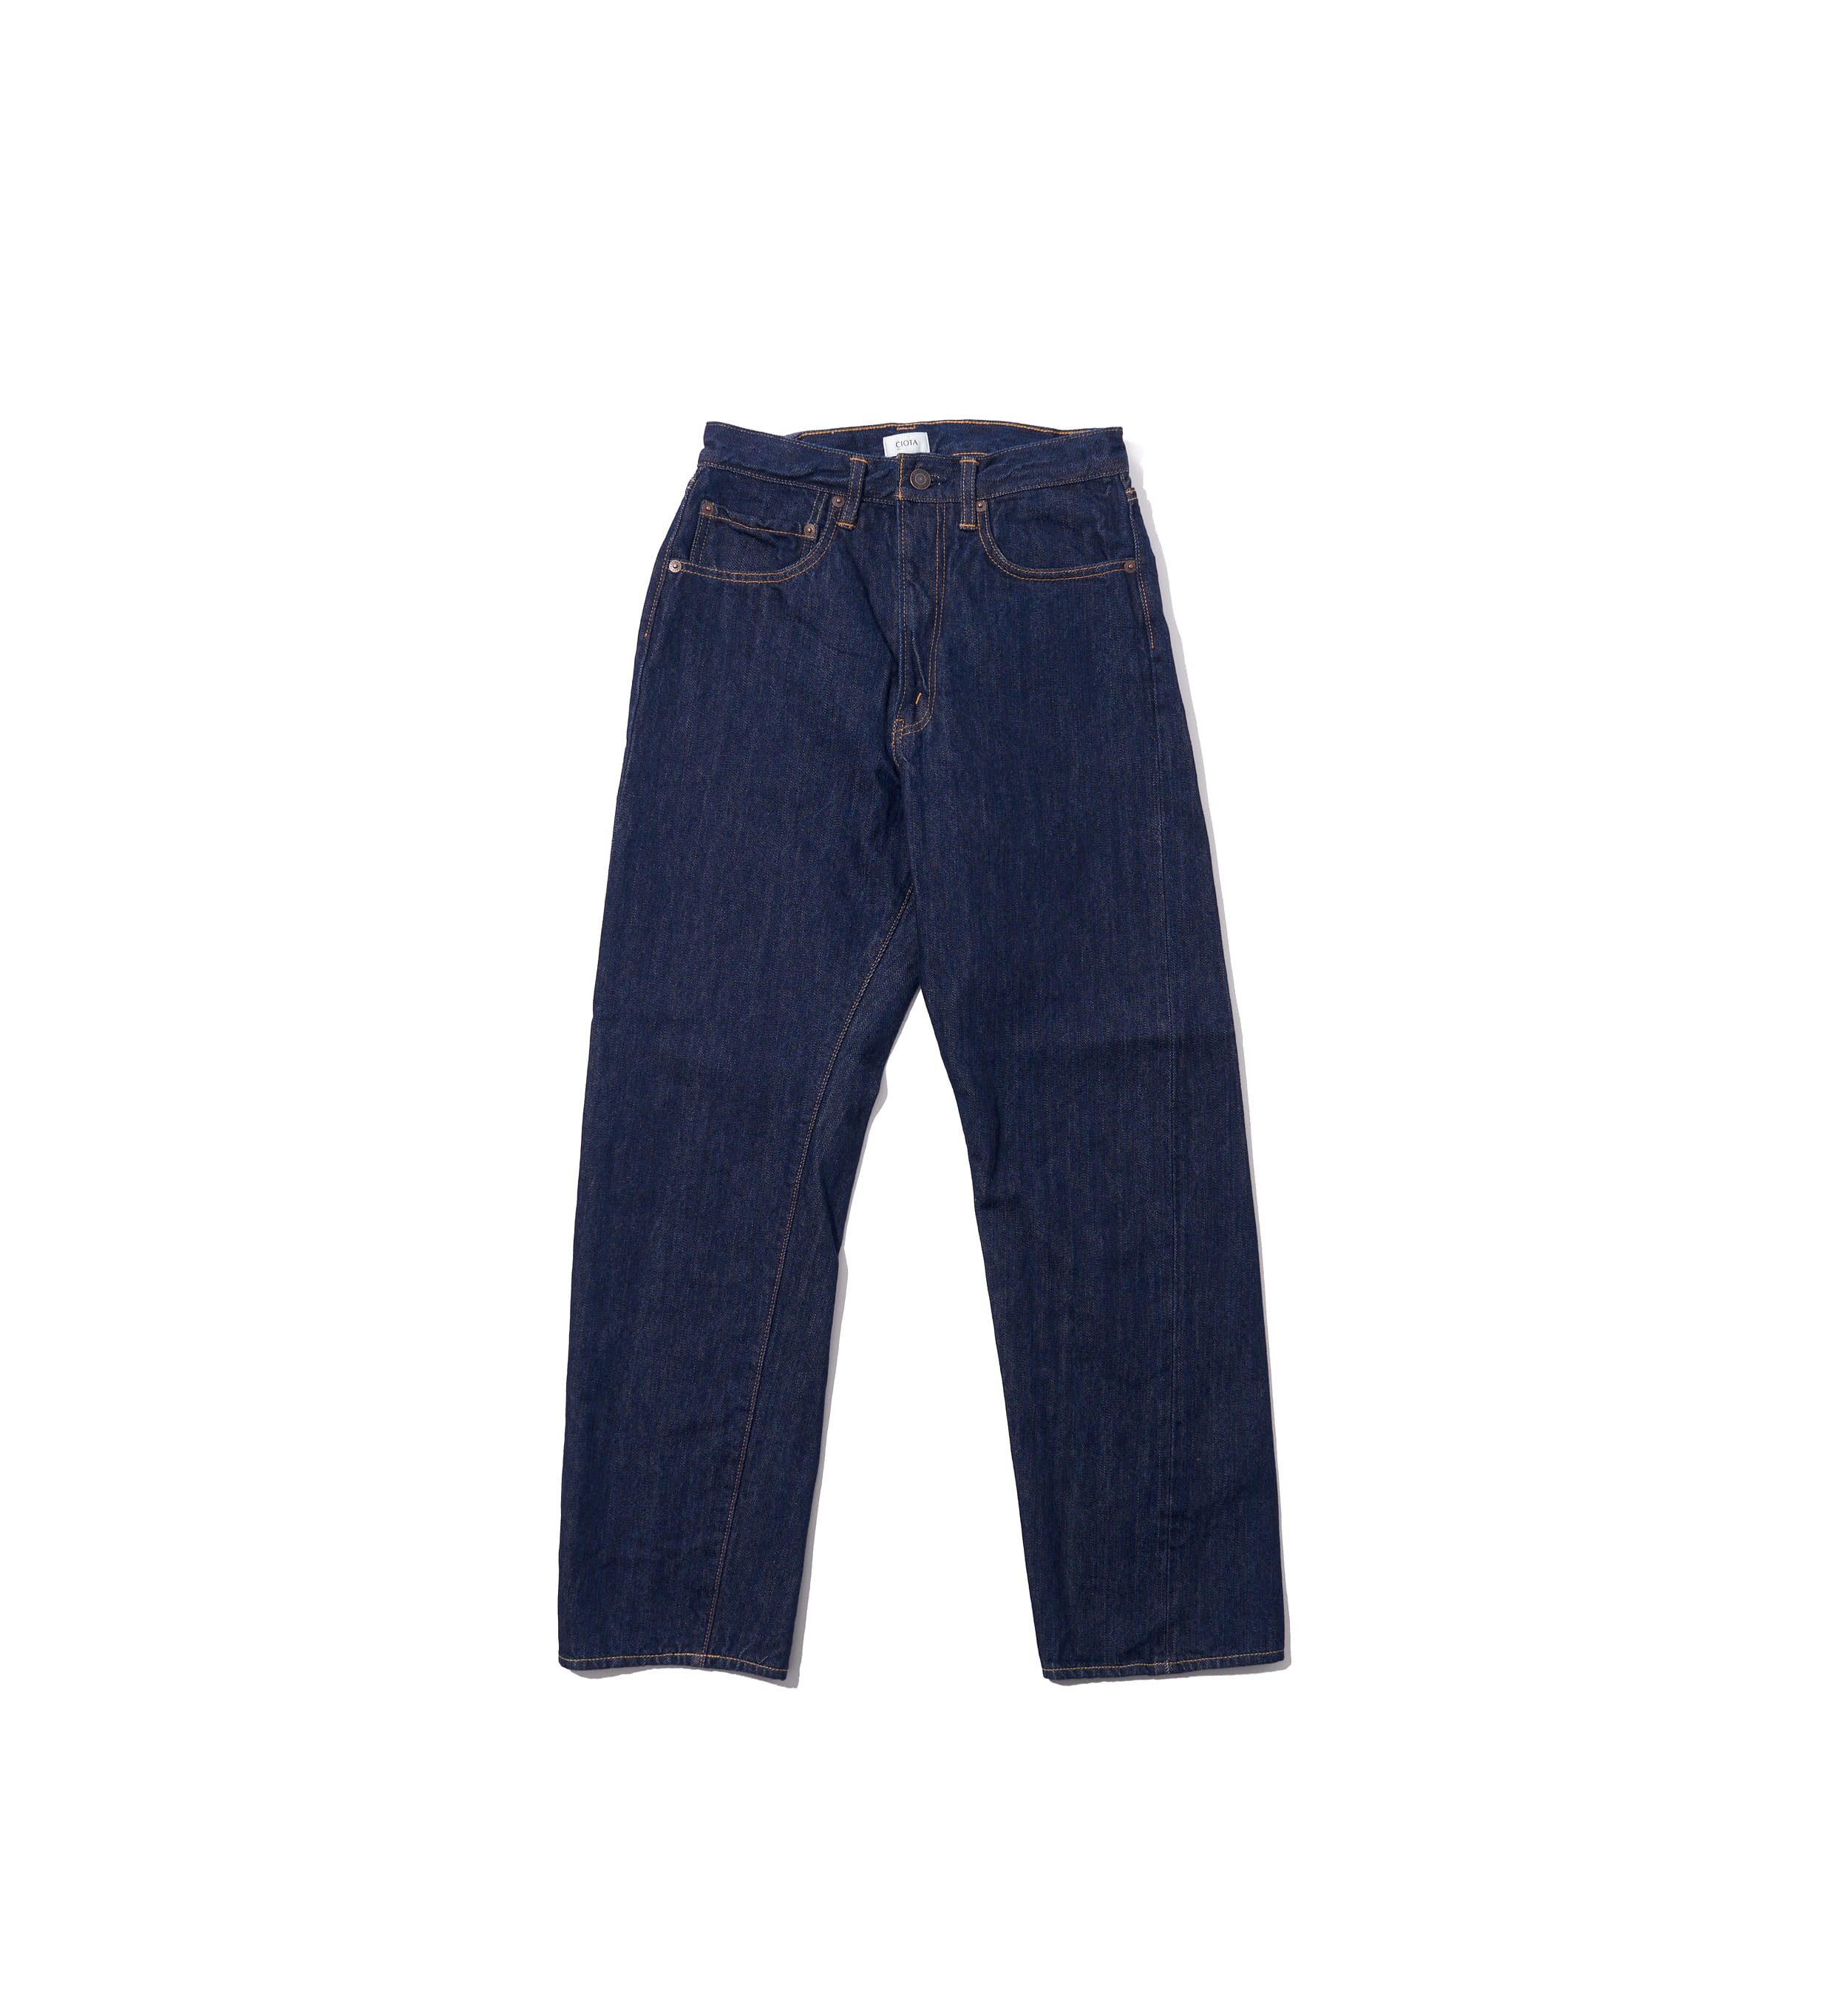 New Tapered 5 Pocket Pants Navy One Wash